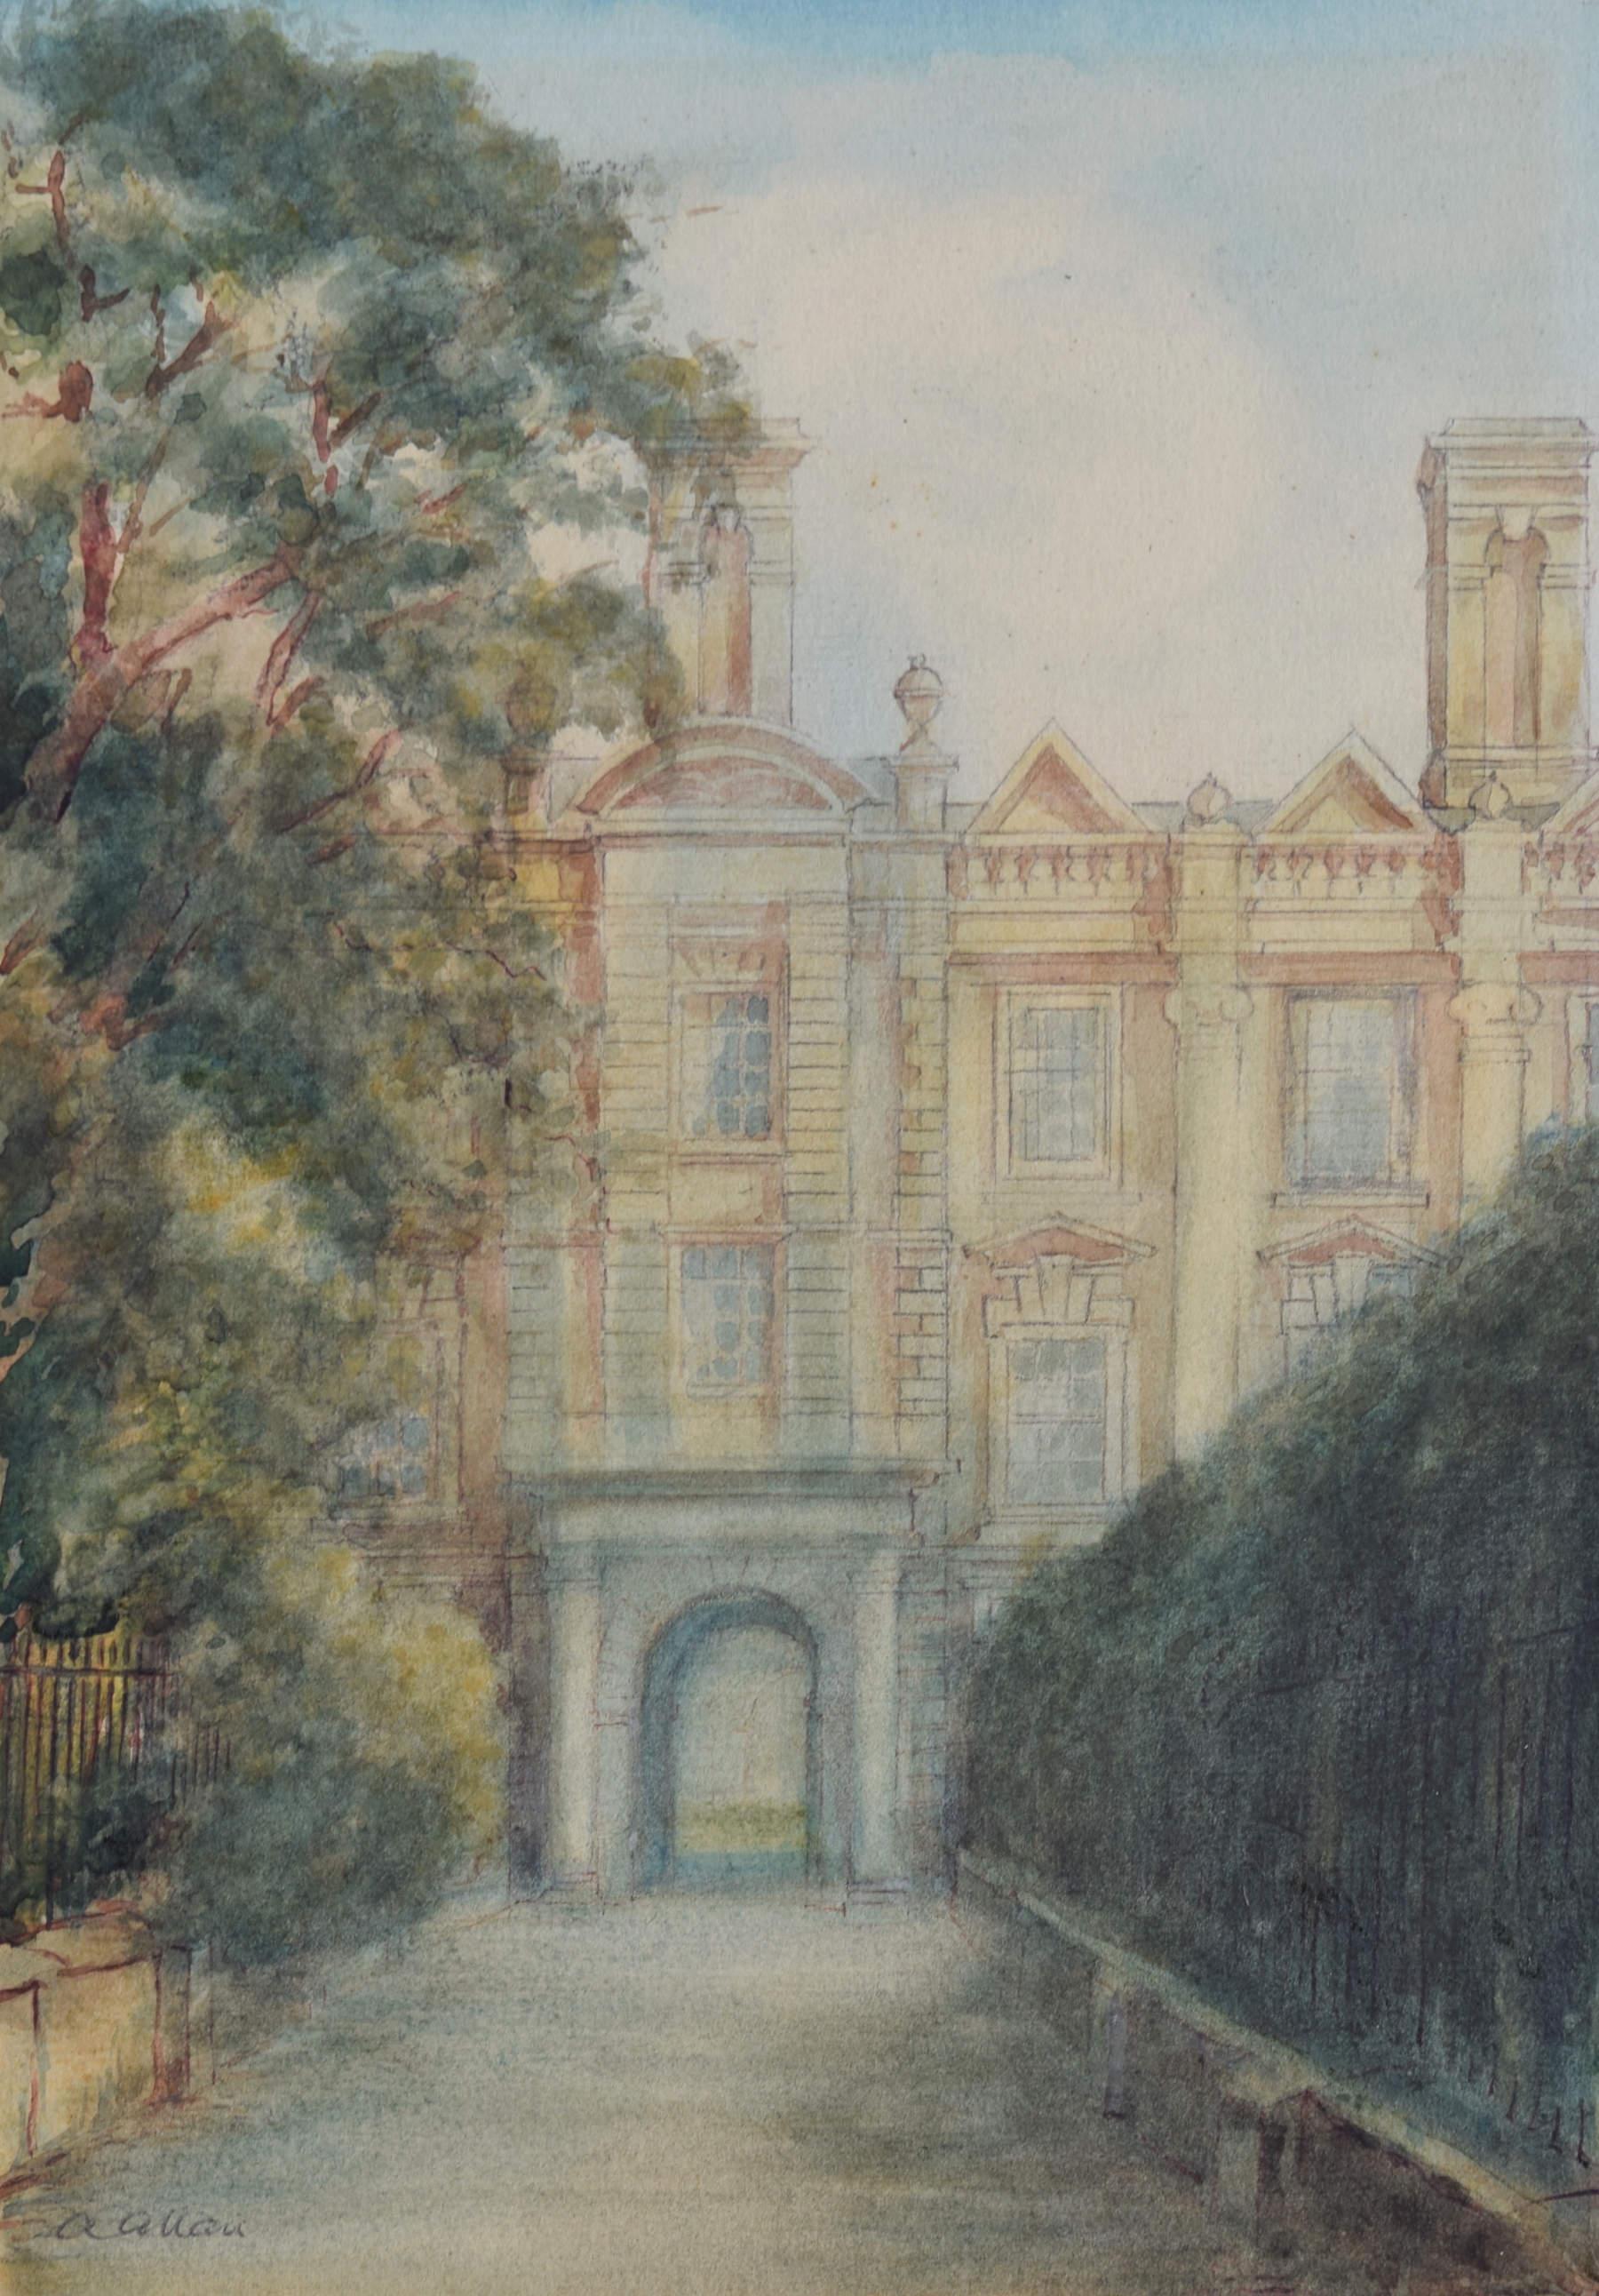 To see our other views of Oxford and Cambridge, scroll down to "More from this Seller" and below it click on "See all from this Seller" - or send us a message if you cannot find the view you want.

Alfred Allan
Clare College,